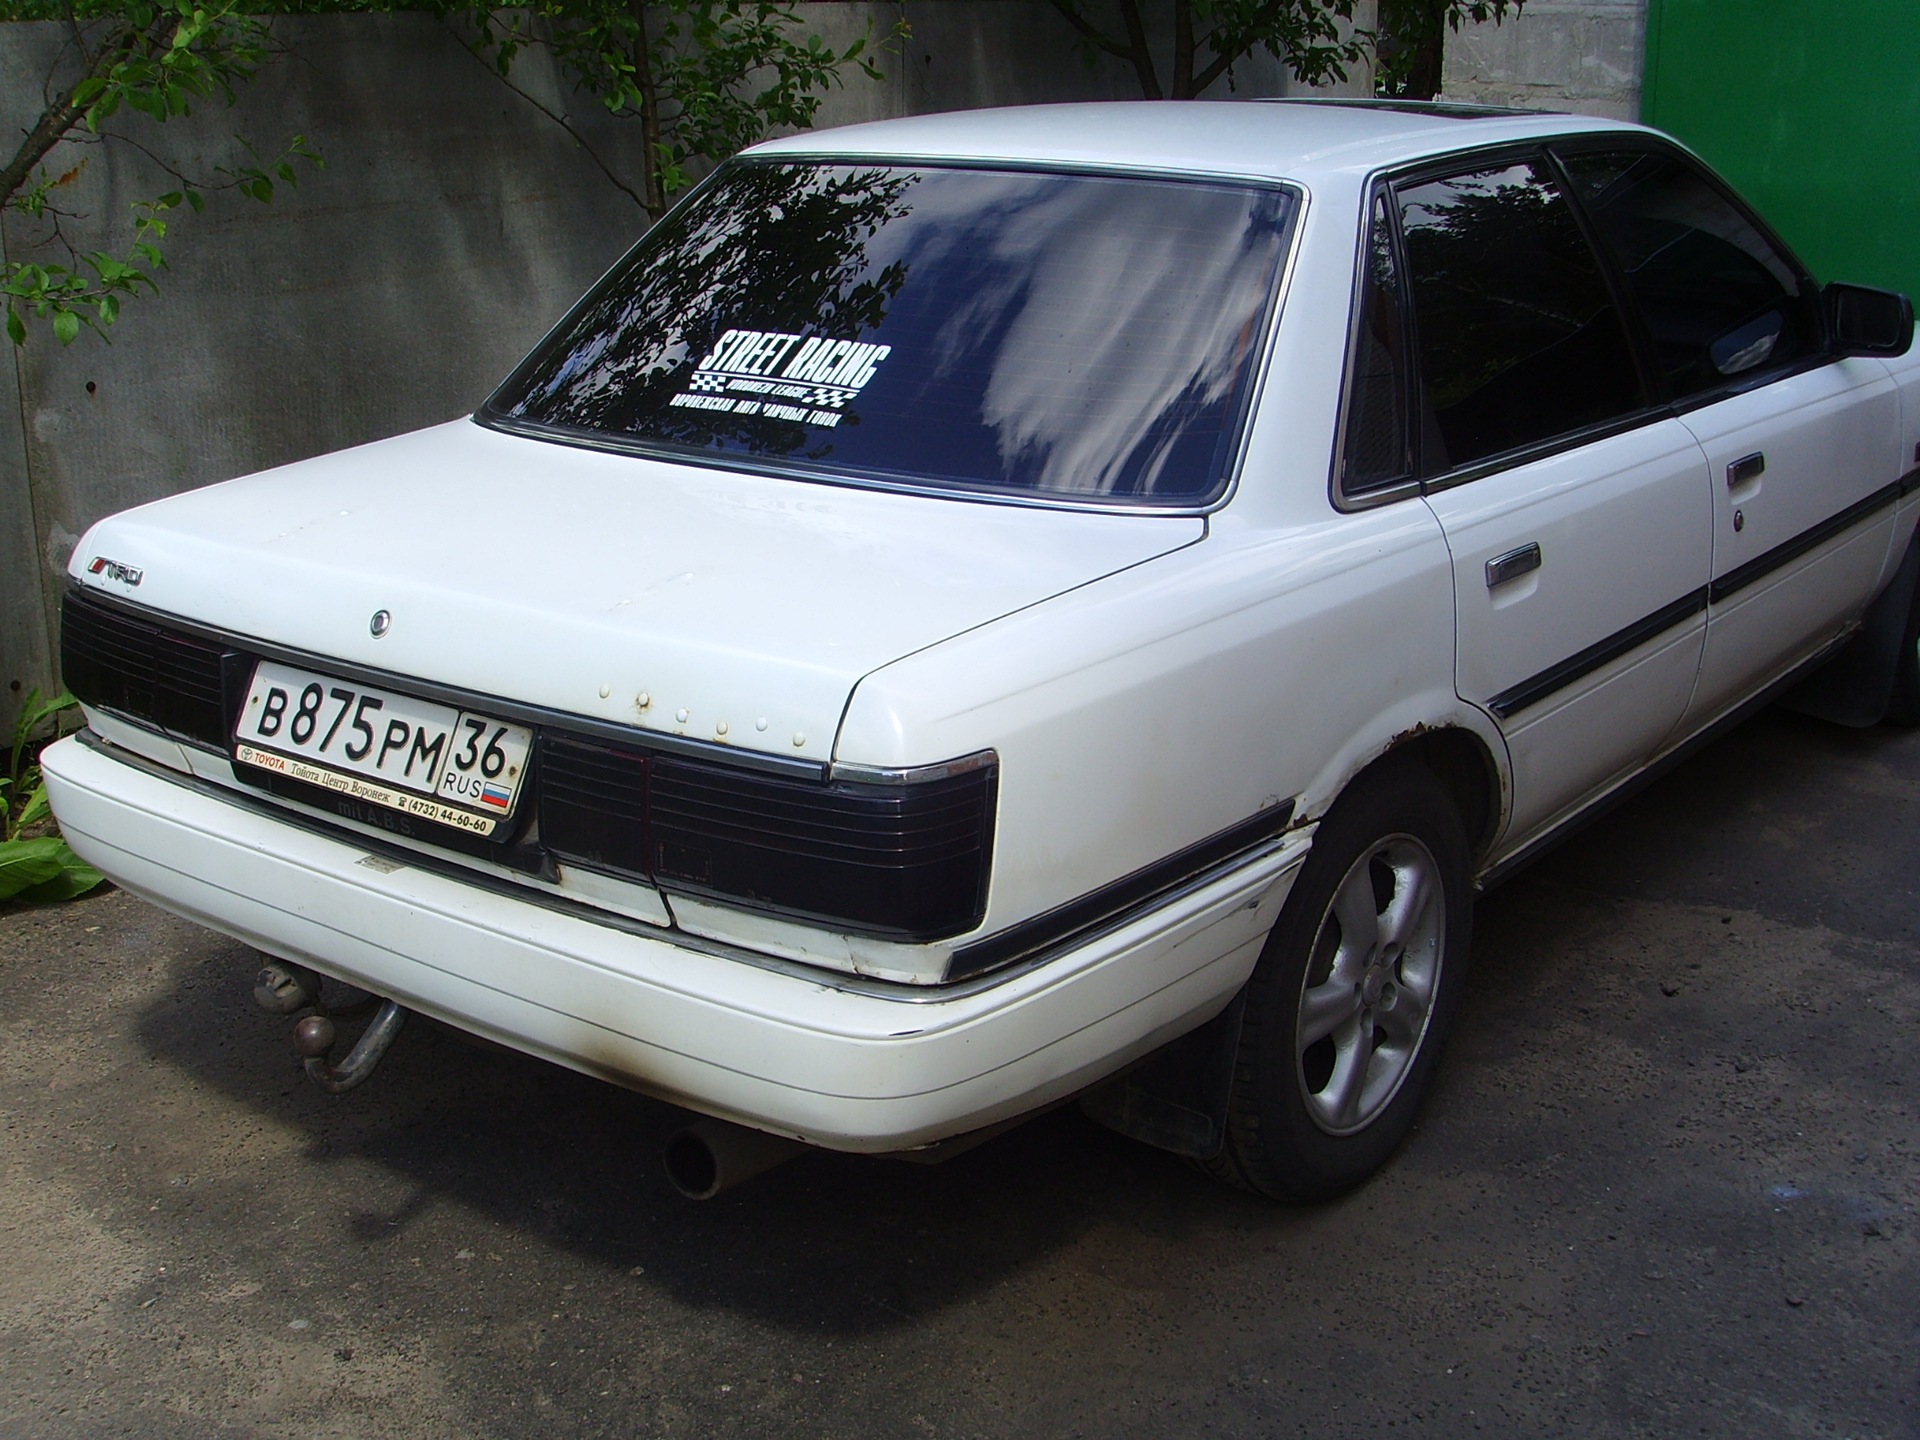 Making new eyelashes and removing the spoiler - Toyota Camry 20 L 1988